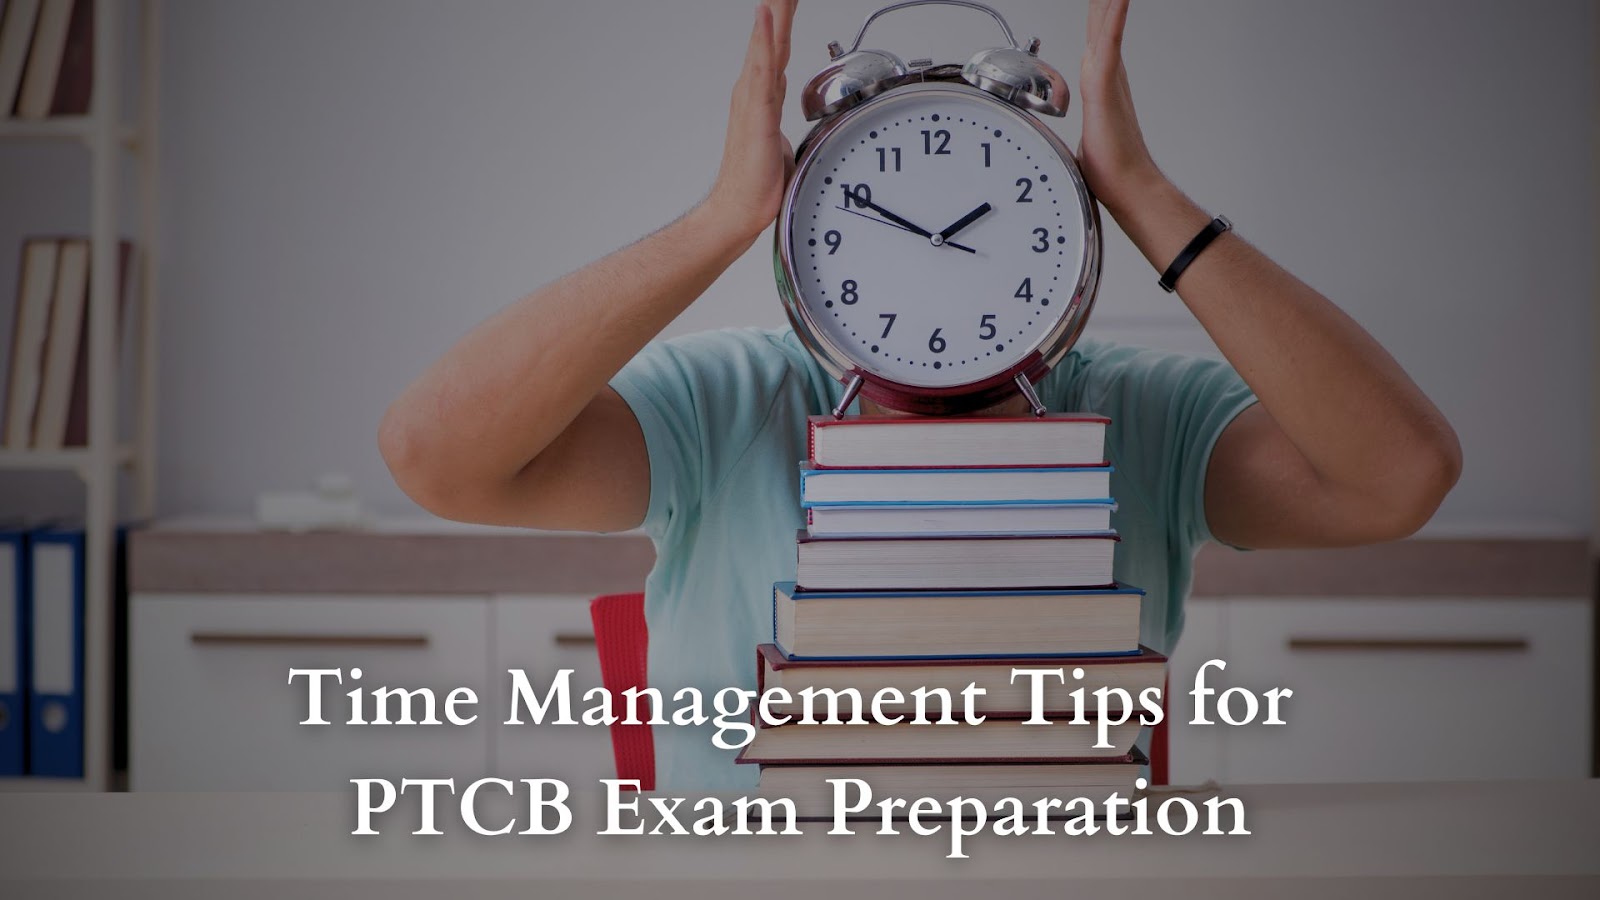 Time Management Tips for PTCB Exam Preparation